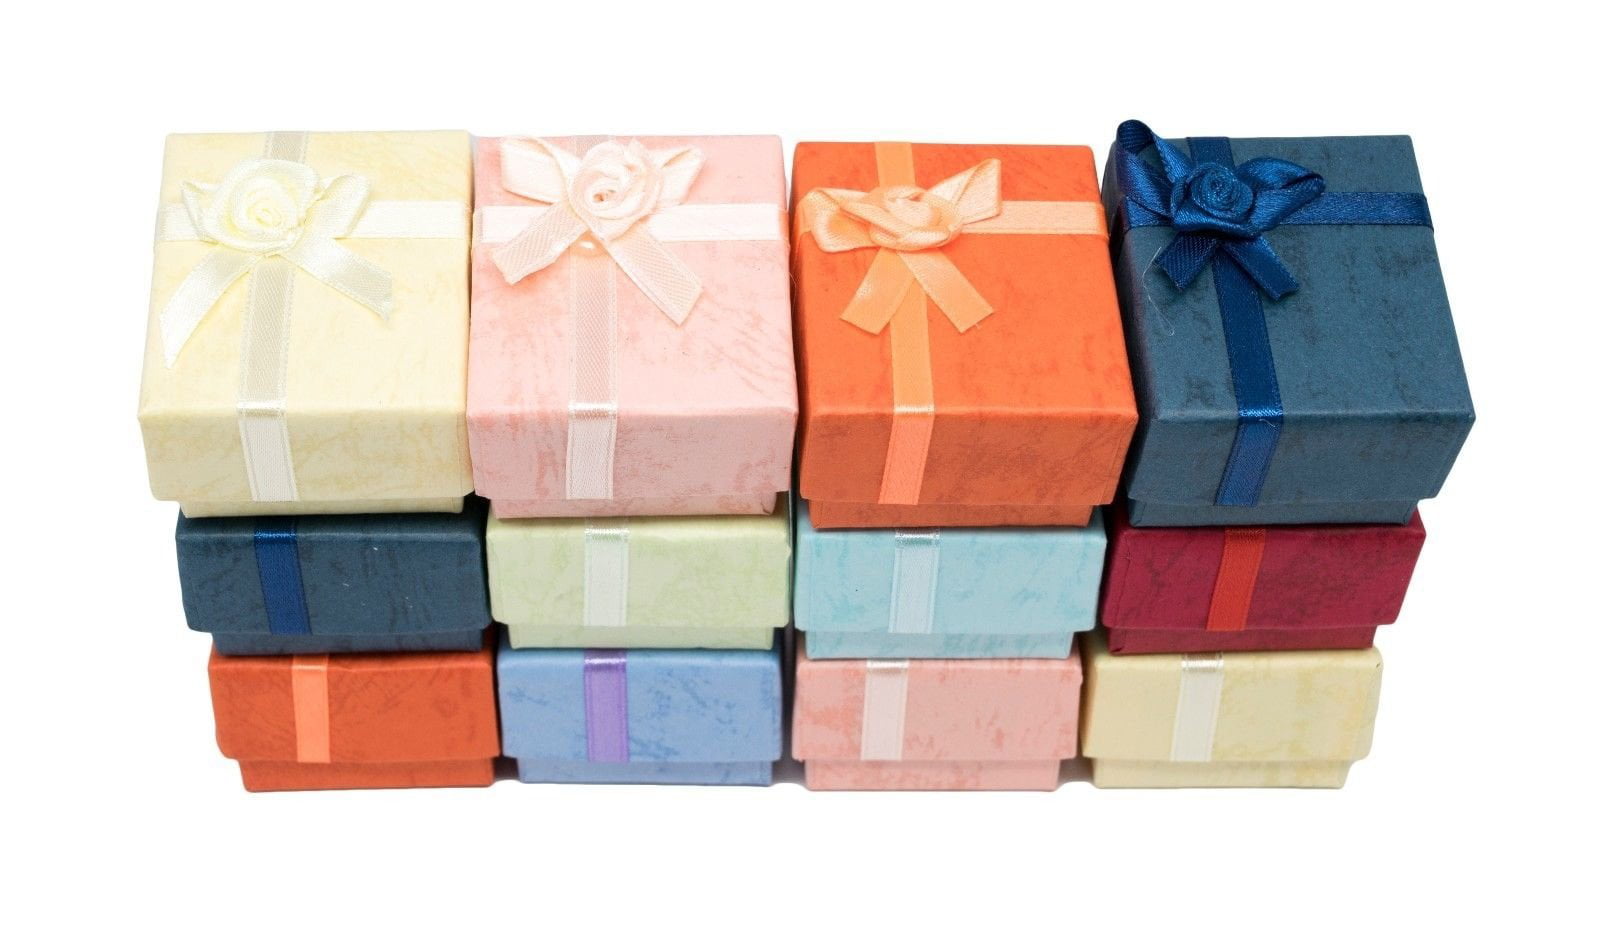 Novel Box™ Cardboard Jewelry Gift Boxes With Rosebug Bows in Assorted Colors 